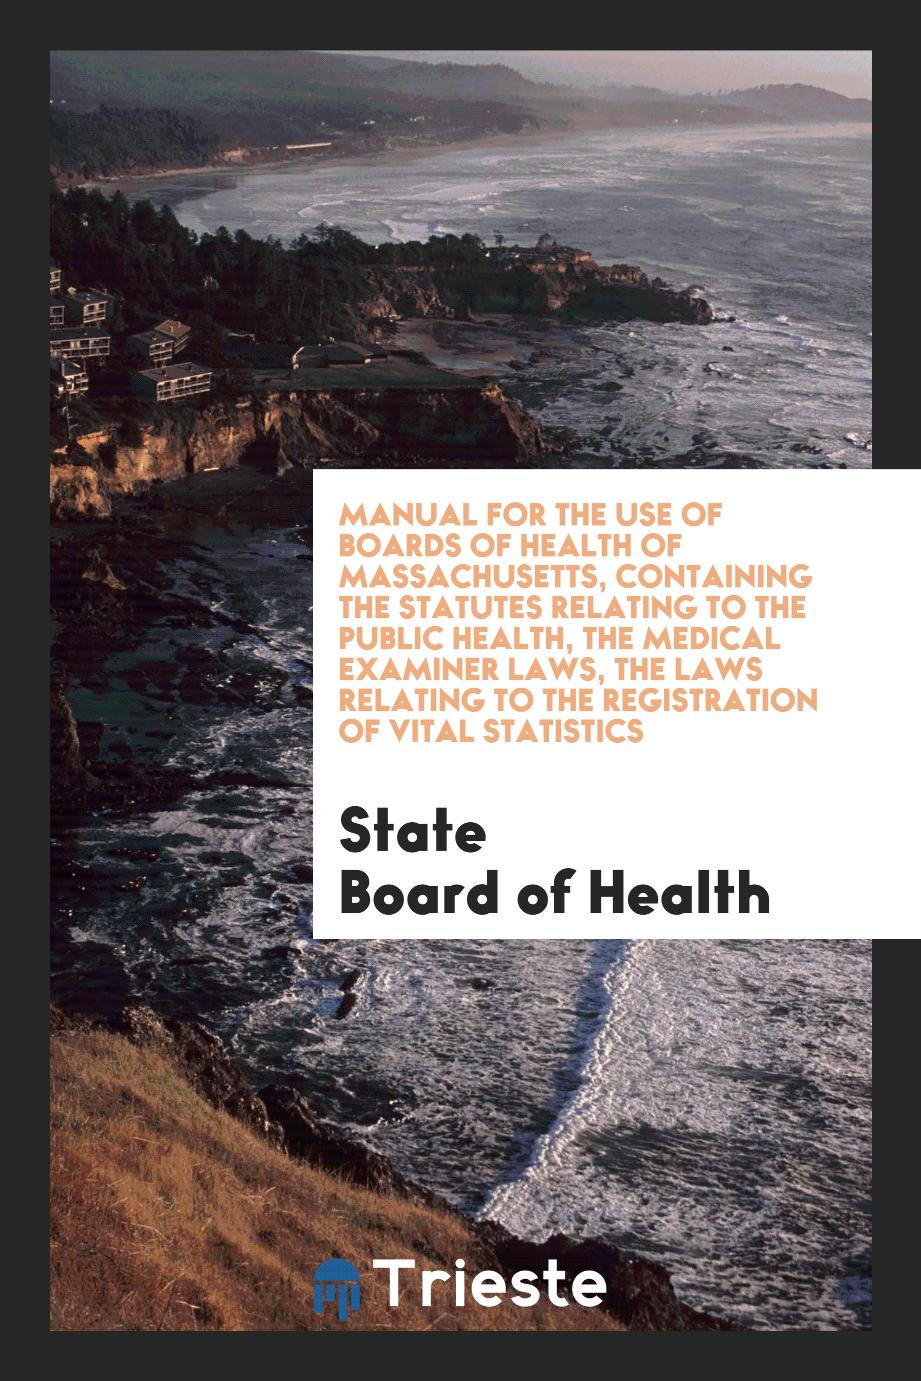 Manual for the Use of Boards of Health of Massachusetts, Containing the Statutes Relating to the Public Health, the Medical Examiner Laws, the Laws Relating to the Registration of Vital Statistics